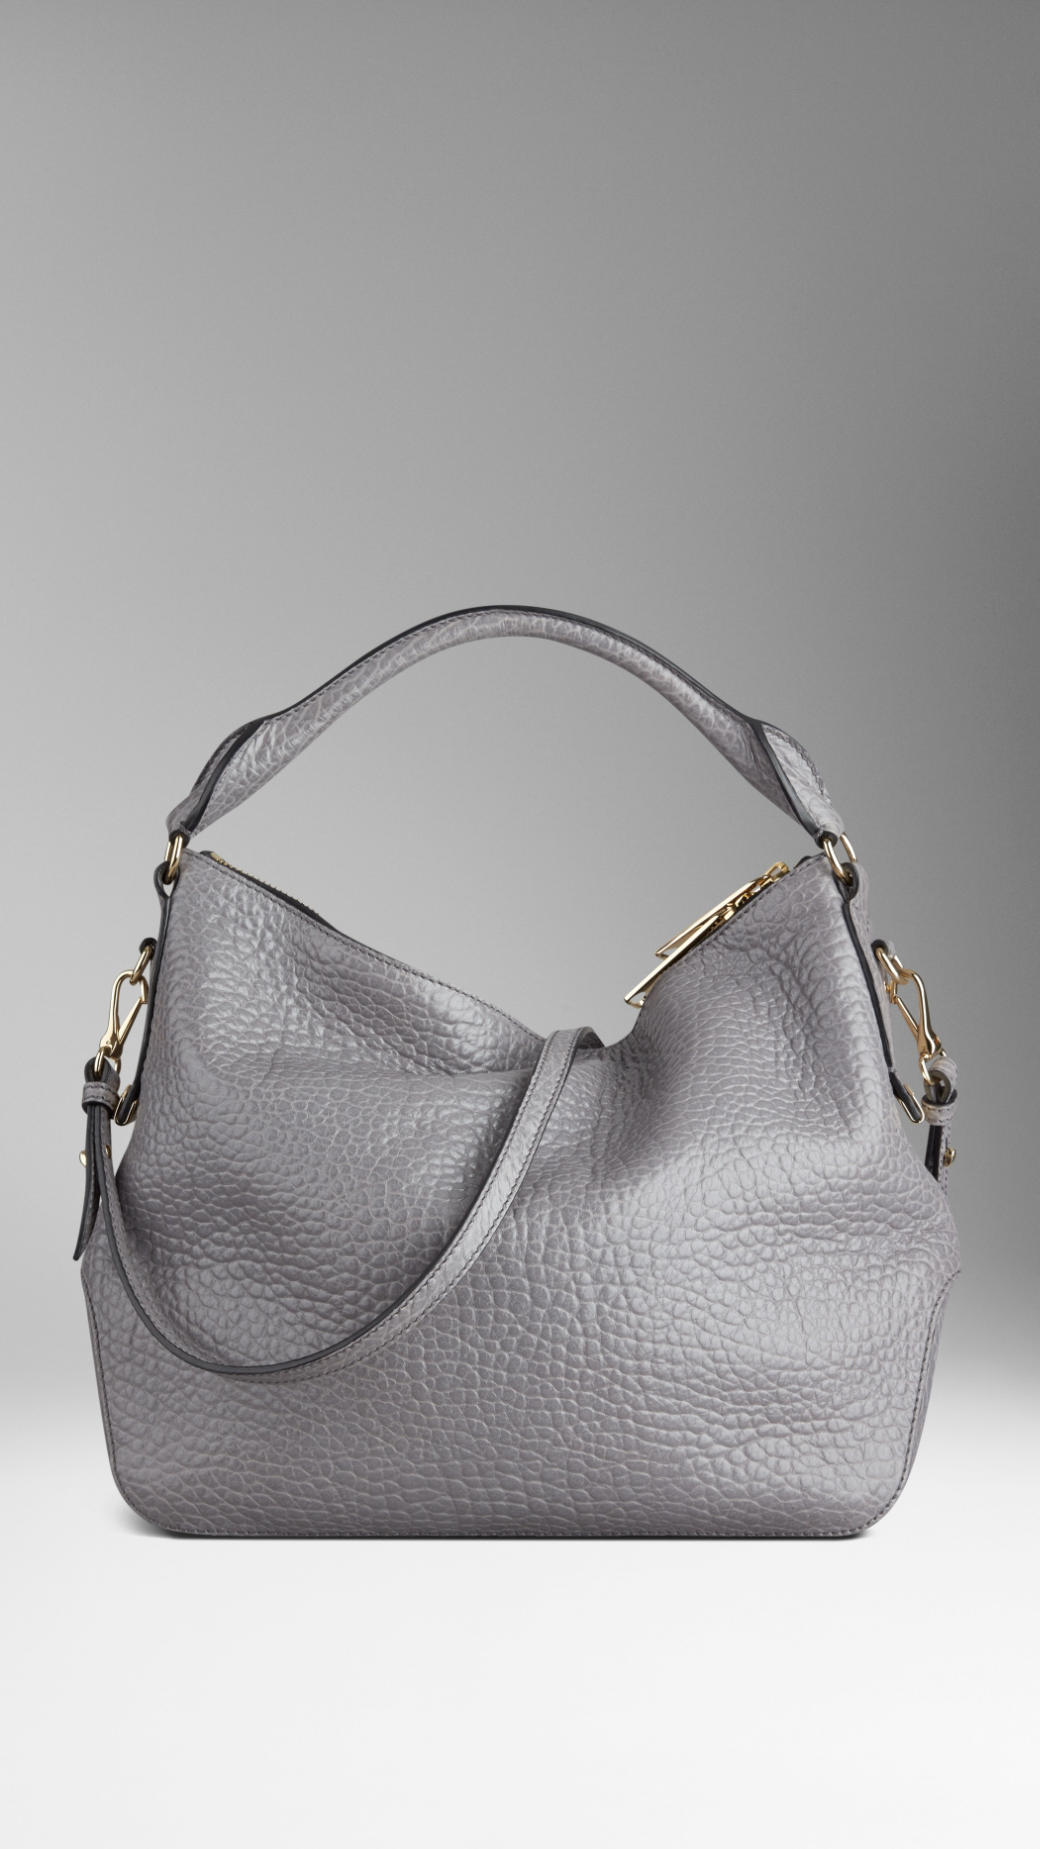 Burberry Small Heritage Grain Leather Hobo Bag in Mid Grey Melange (Gray) - Lyst